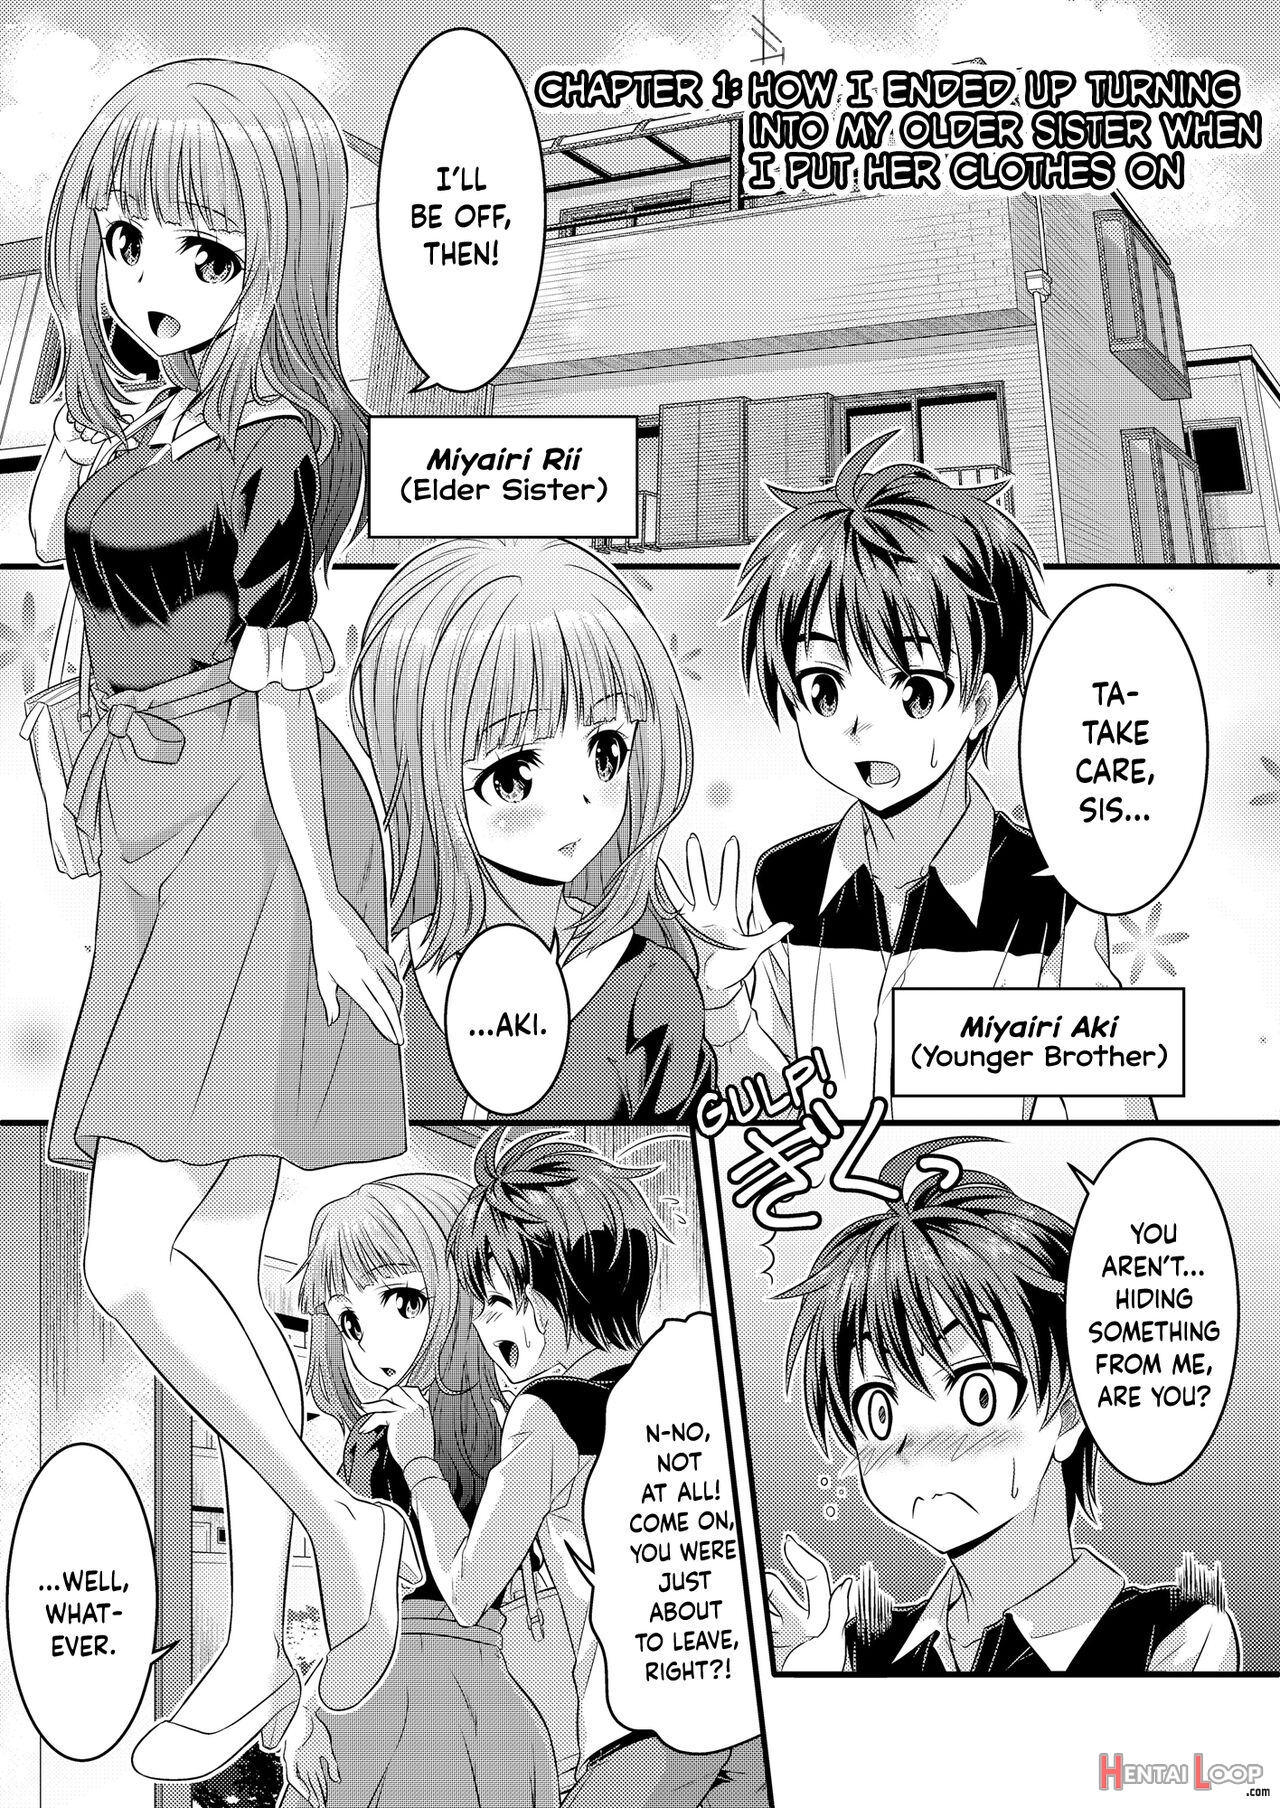 Metamorphic ★ Dress-up ~how I Ended Up Turning Into The Girls I Cross-dressed As~ Sister Arc & Classmate Arc page 2